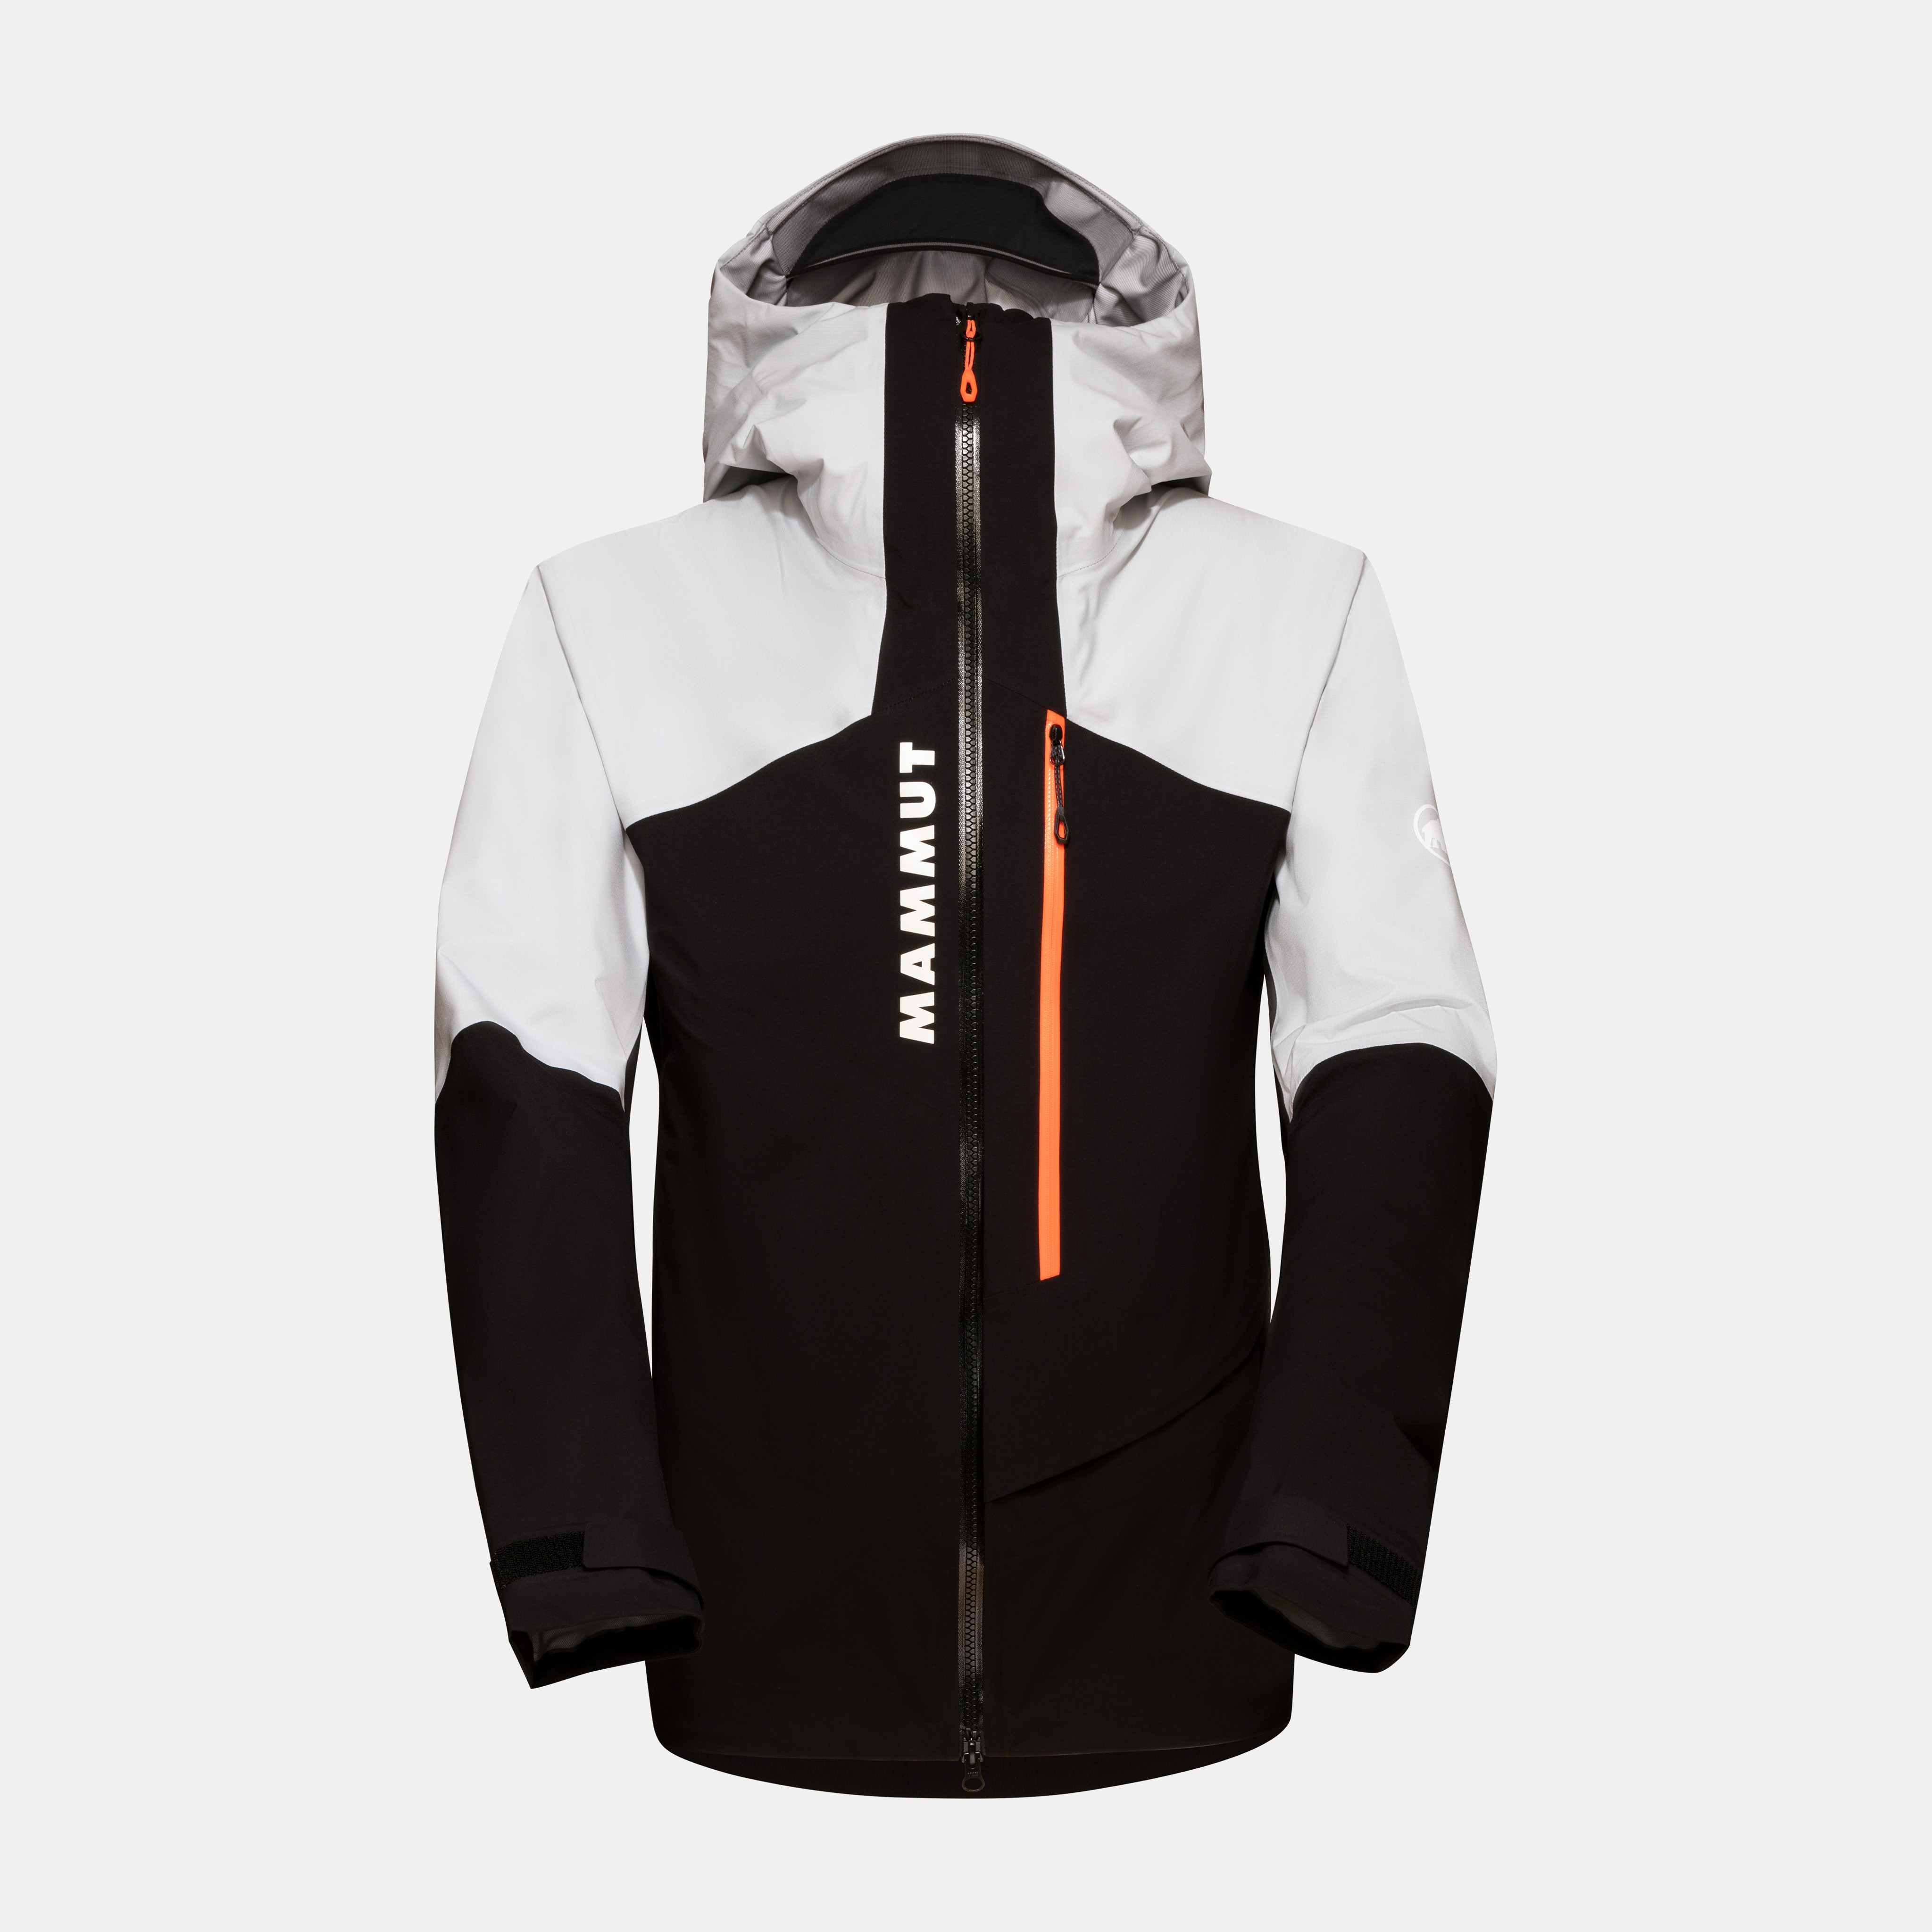 Aenergy Air HS Hooded Jacket Men product image